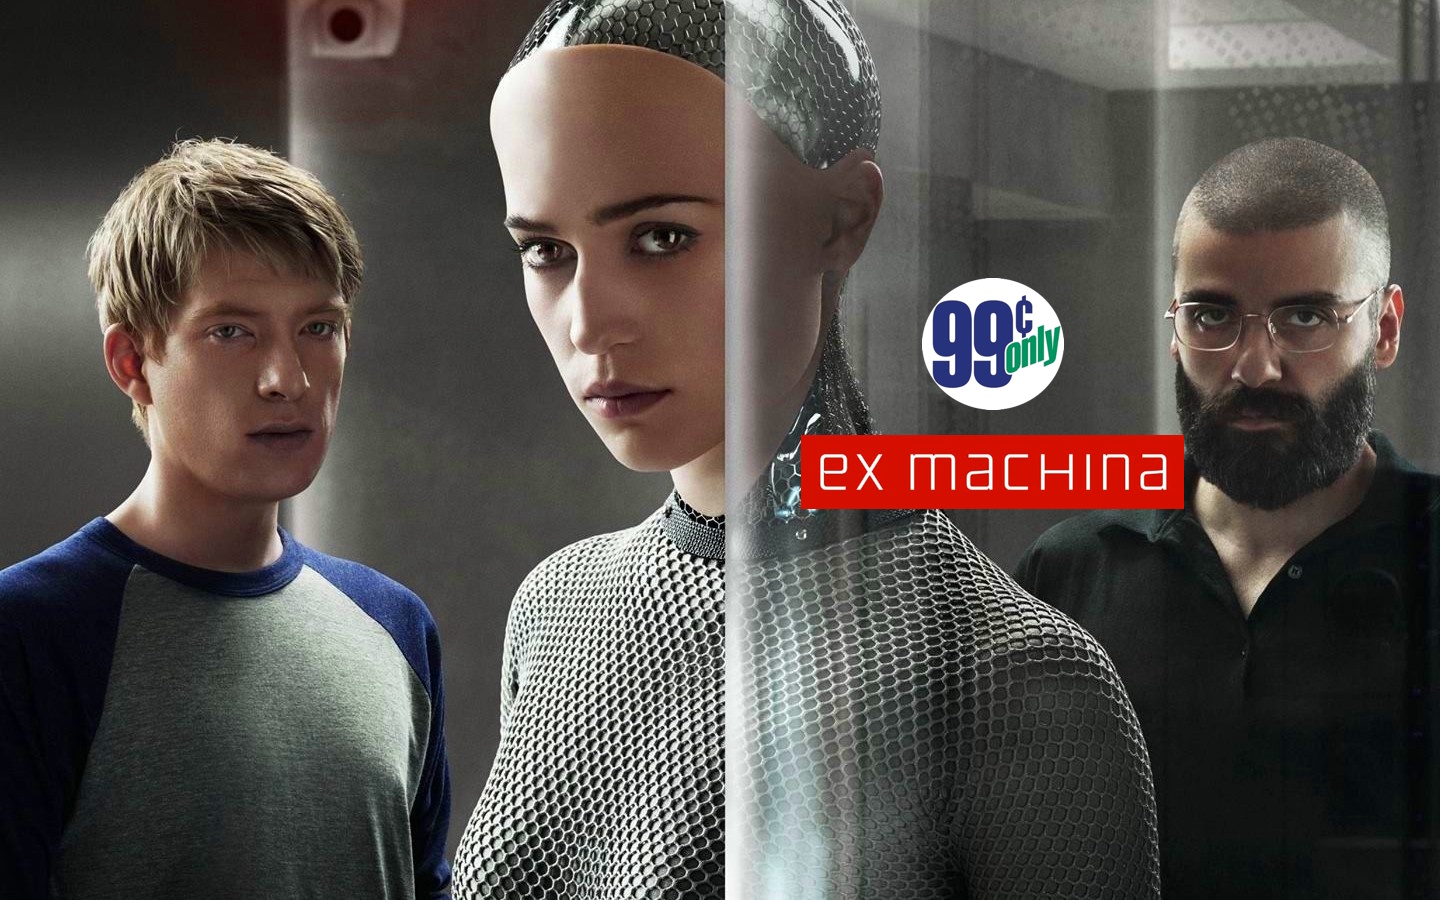 The itunes 99 cent movie rental of the week: ‘ex machina’